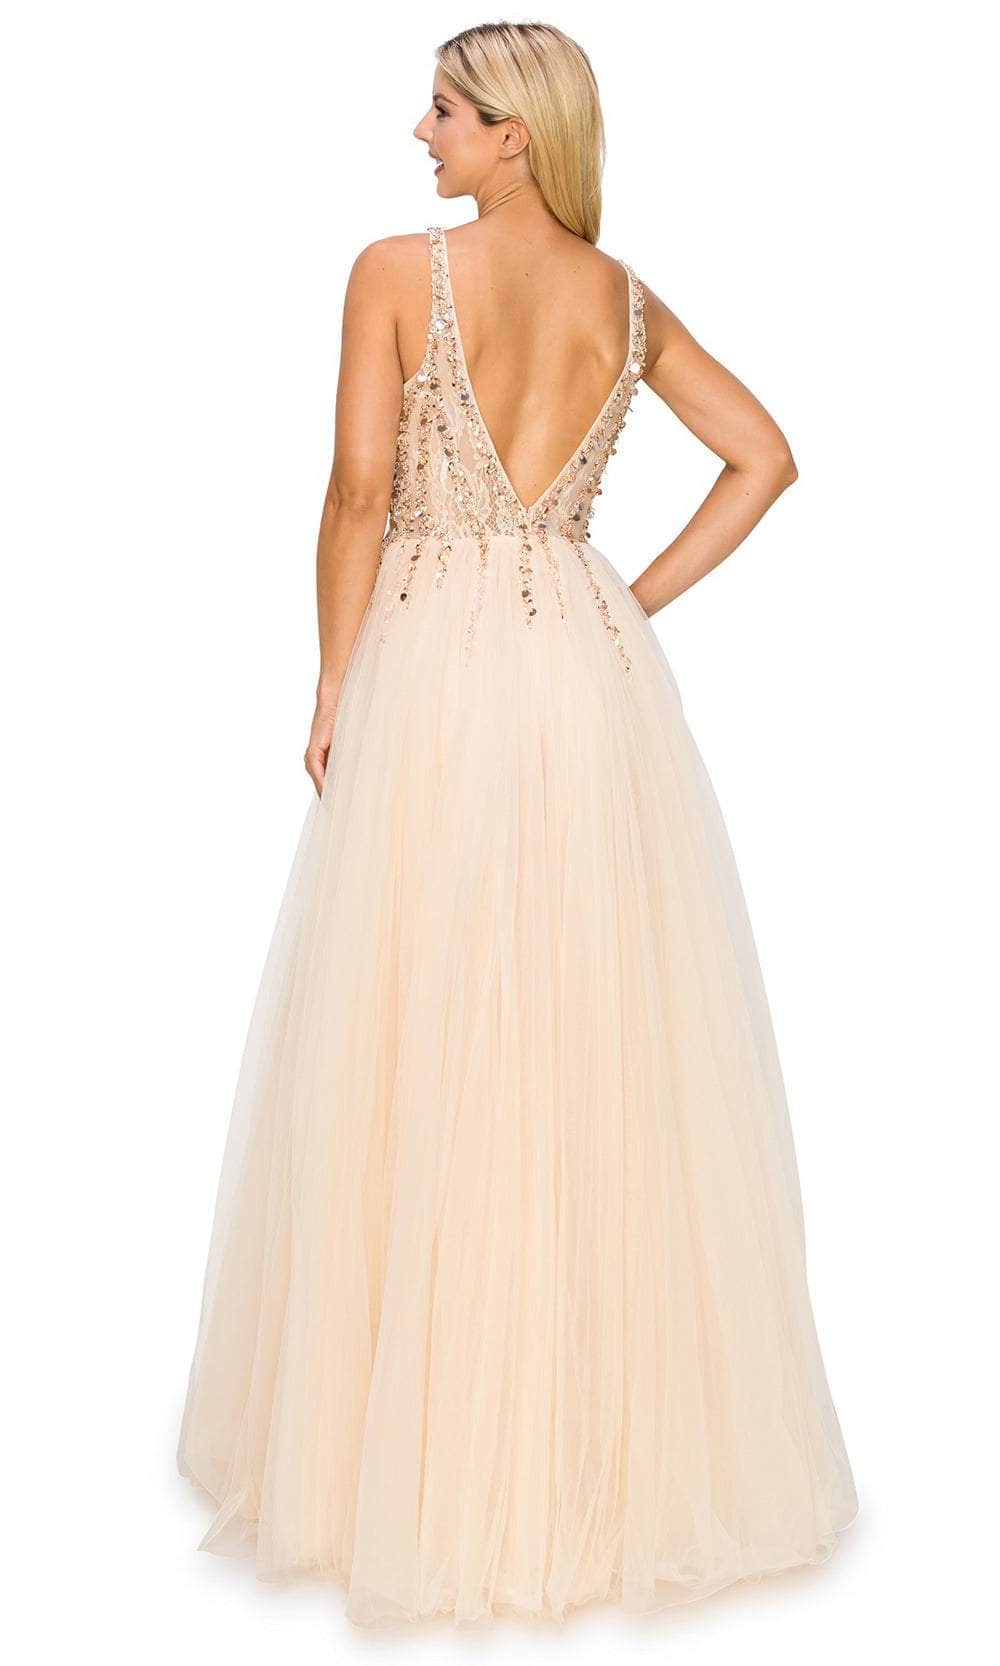 Cinderella Couture 8034J - Plunging V-Back Prom Gown Special Occasion Dress